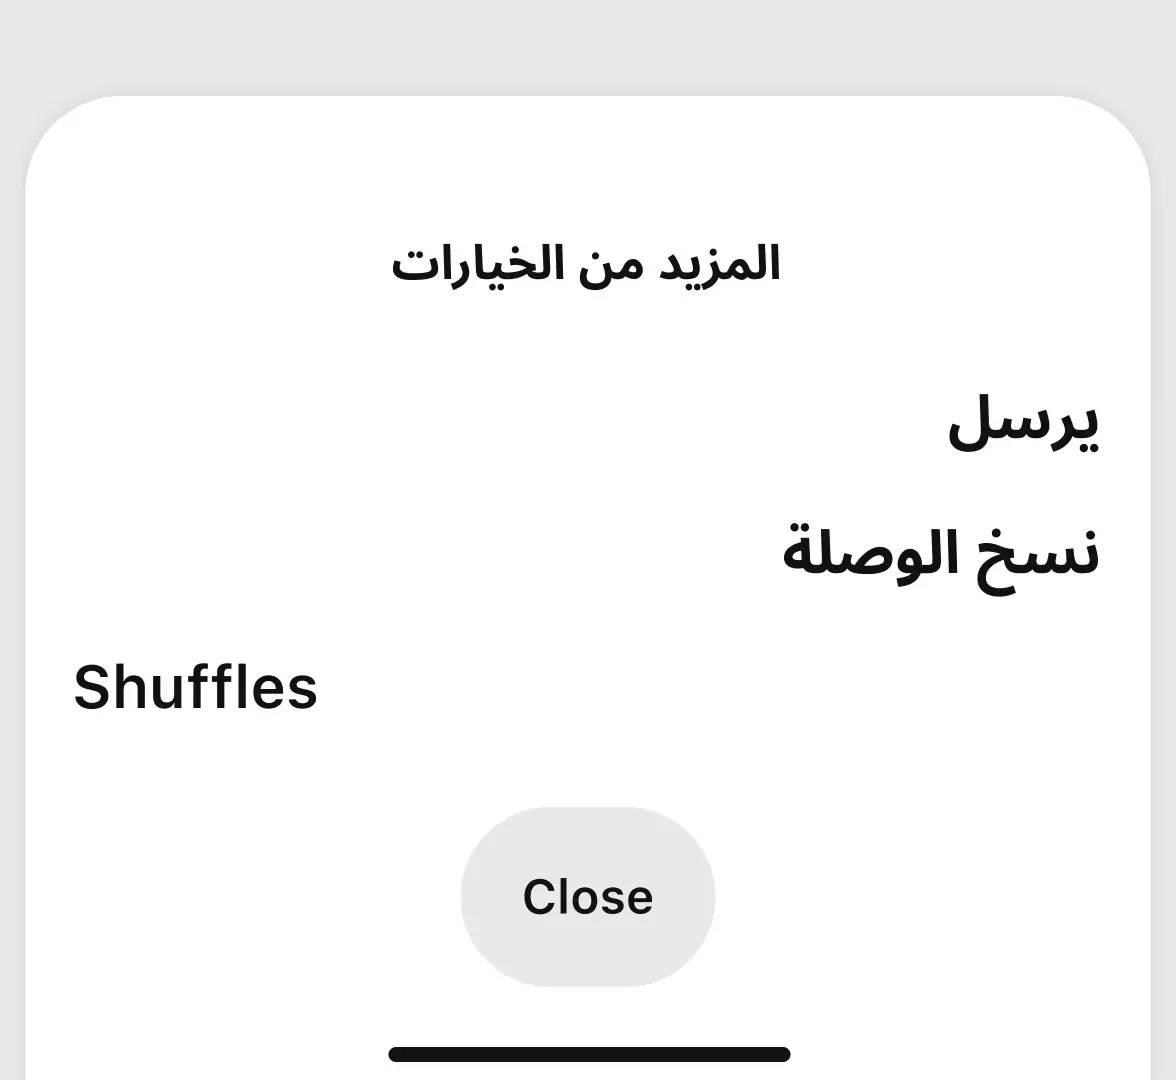 A menu with two Arabic items rignt-aligned and one English item left-aligned.